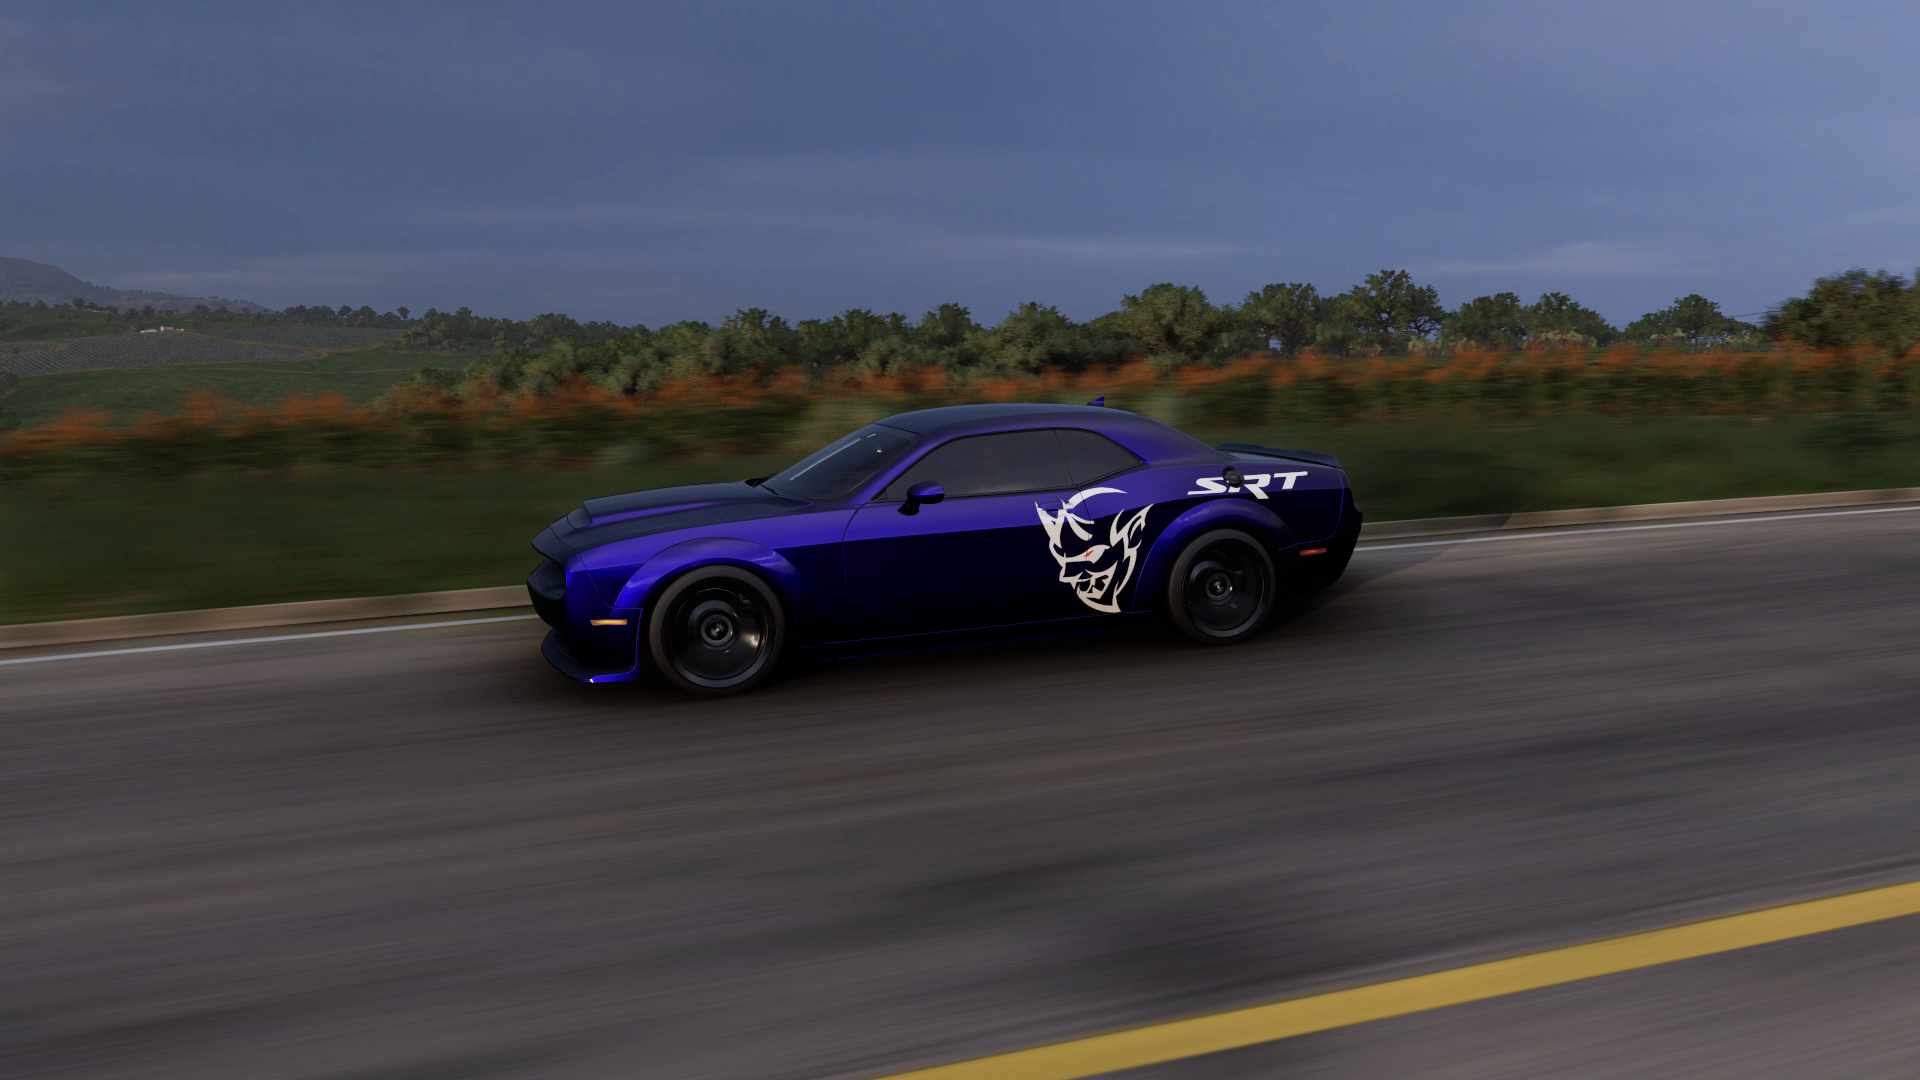 General 1920x1080 Dodge Challenger Forza Horizon 5 car Dodge muscle cars American cars Stellantis PlaygroundGames road video games blurred motion blur side view vehicle video game art sky trees CGI driving